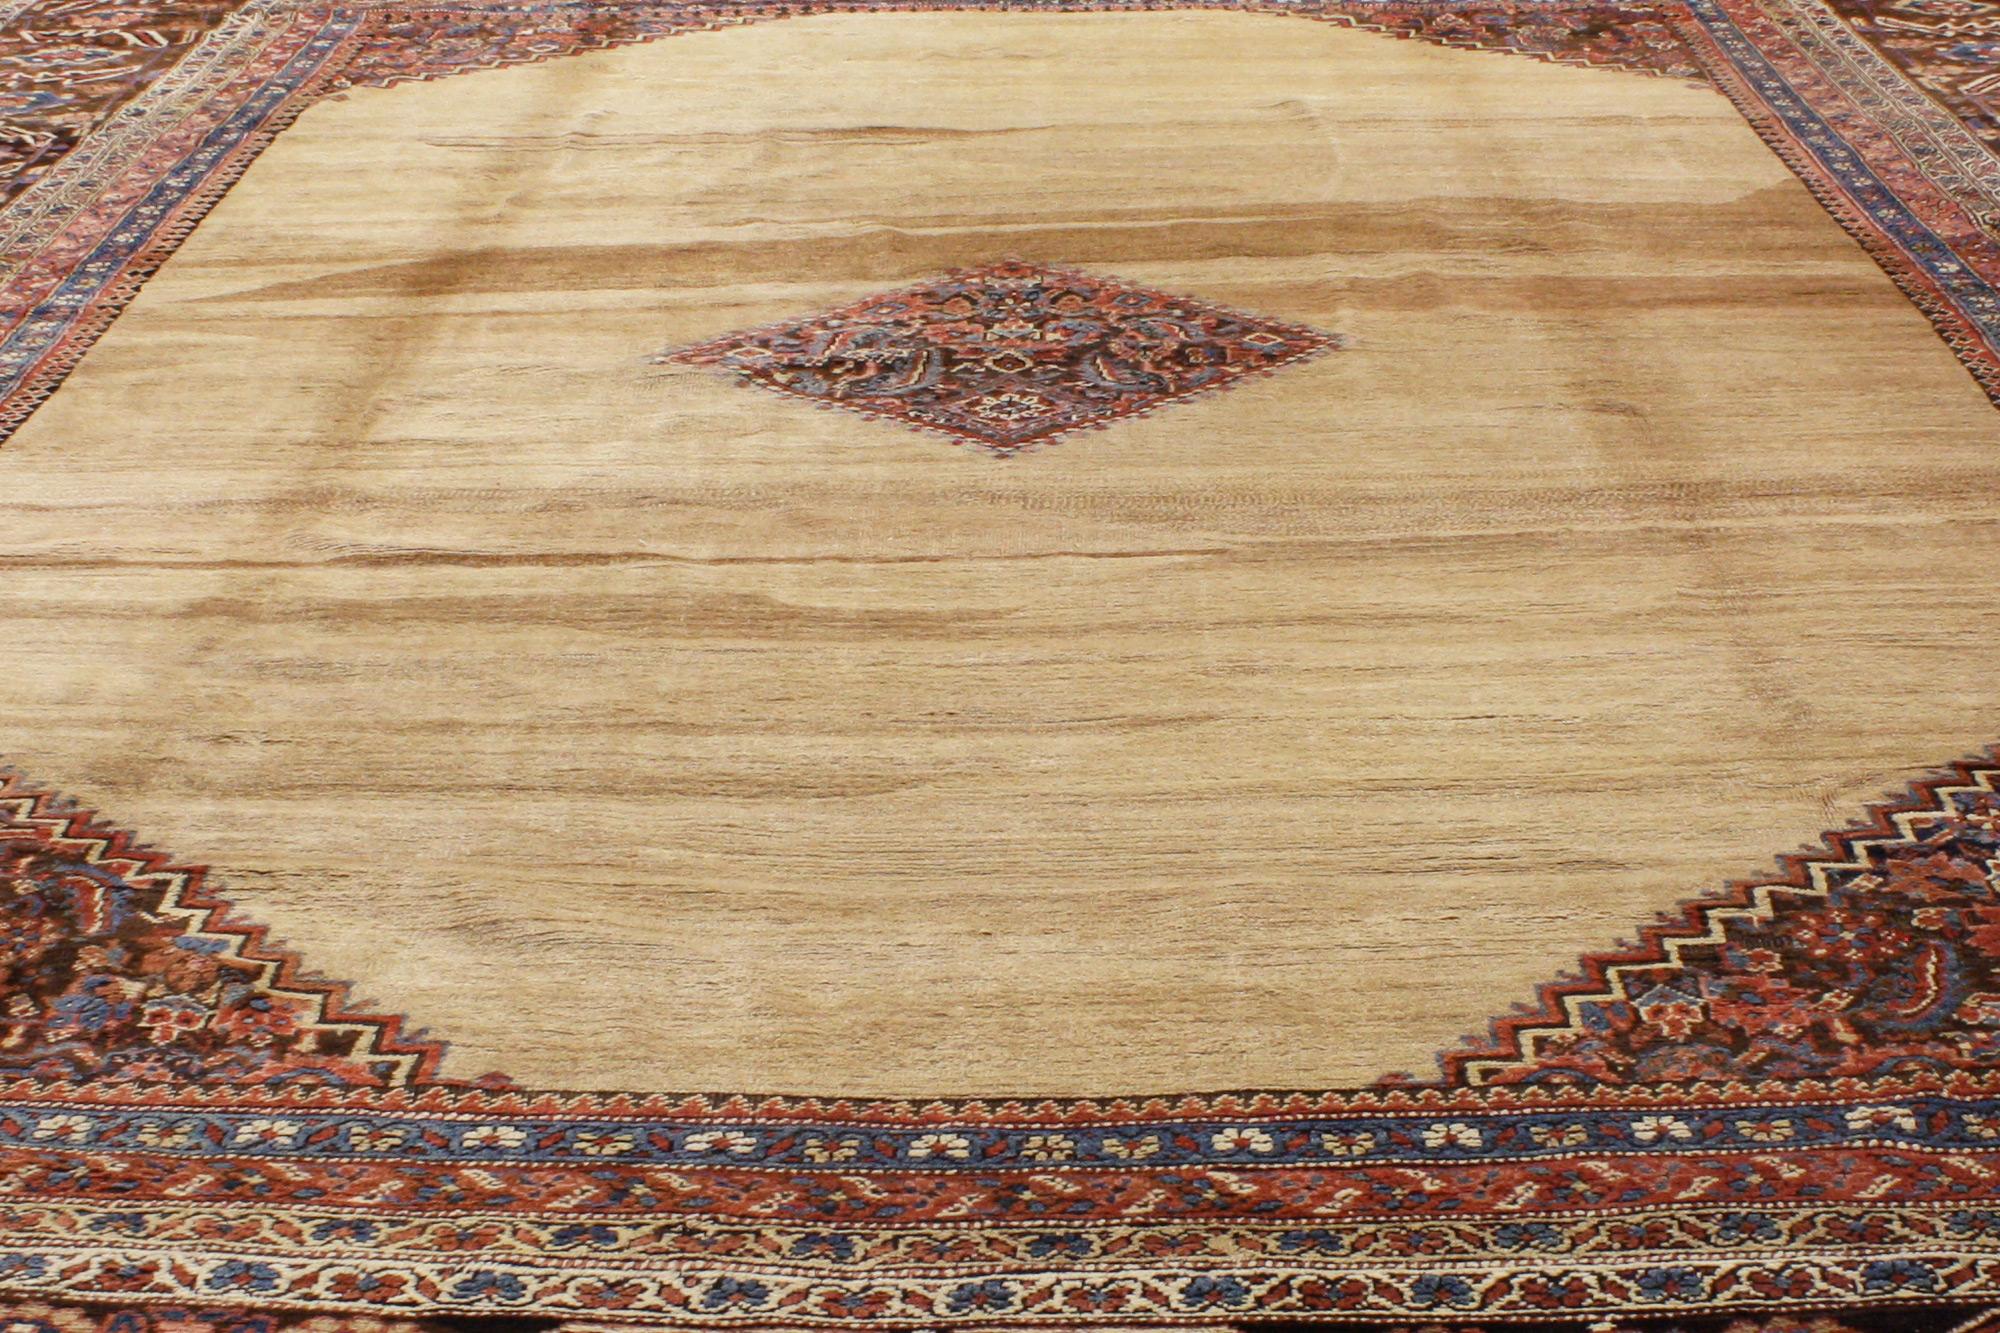 Oversized Antique Persian Bakshaish Rug, Hotel Lobby Size Carpet In Good Condition For Sale In Dallas, TX